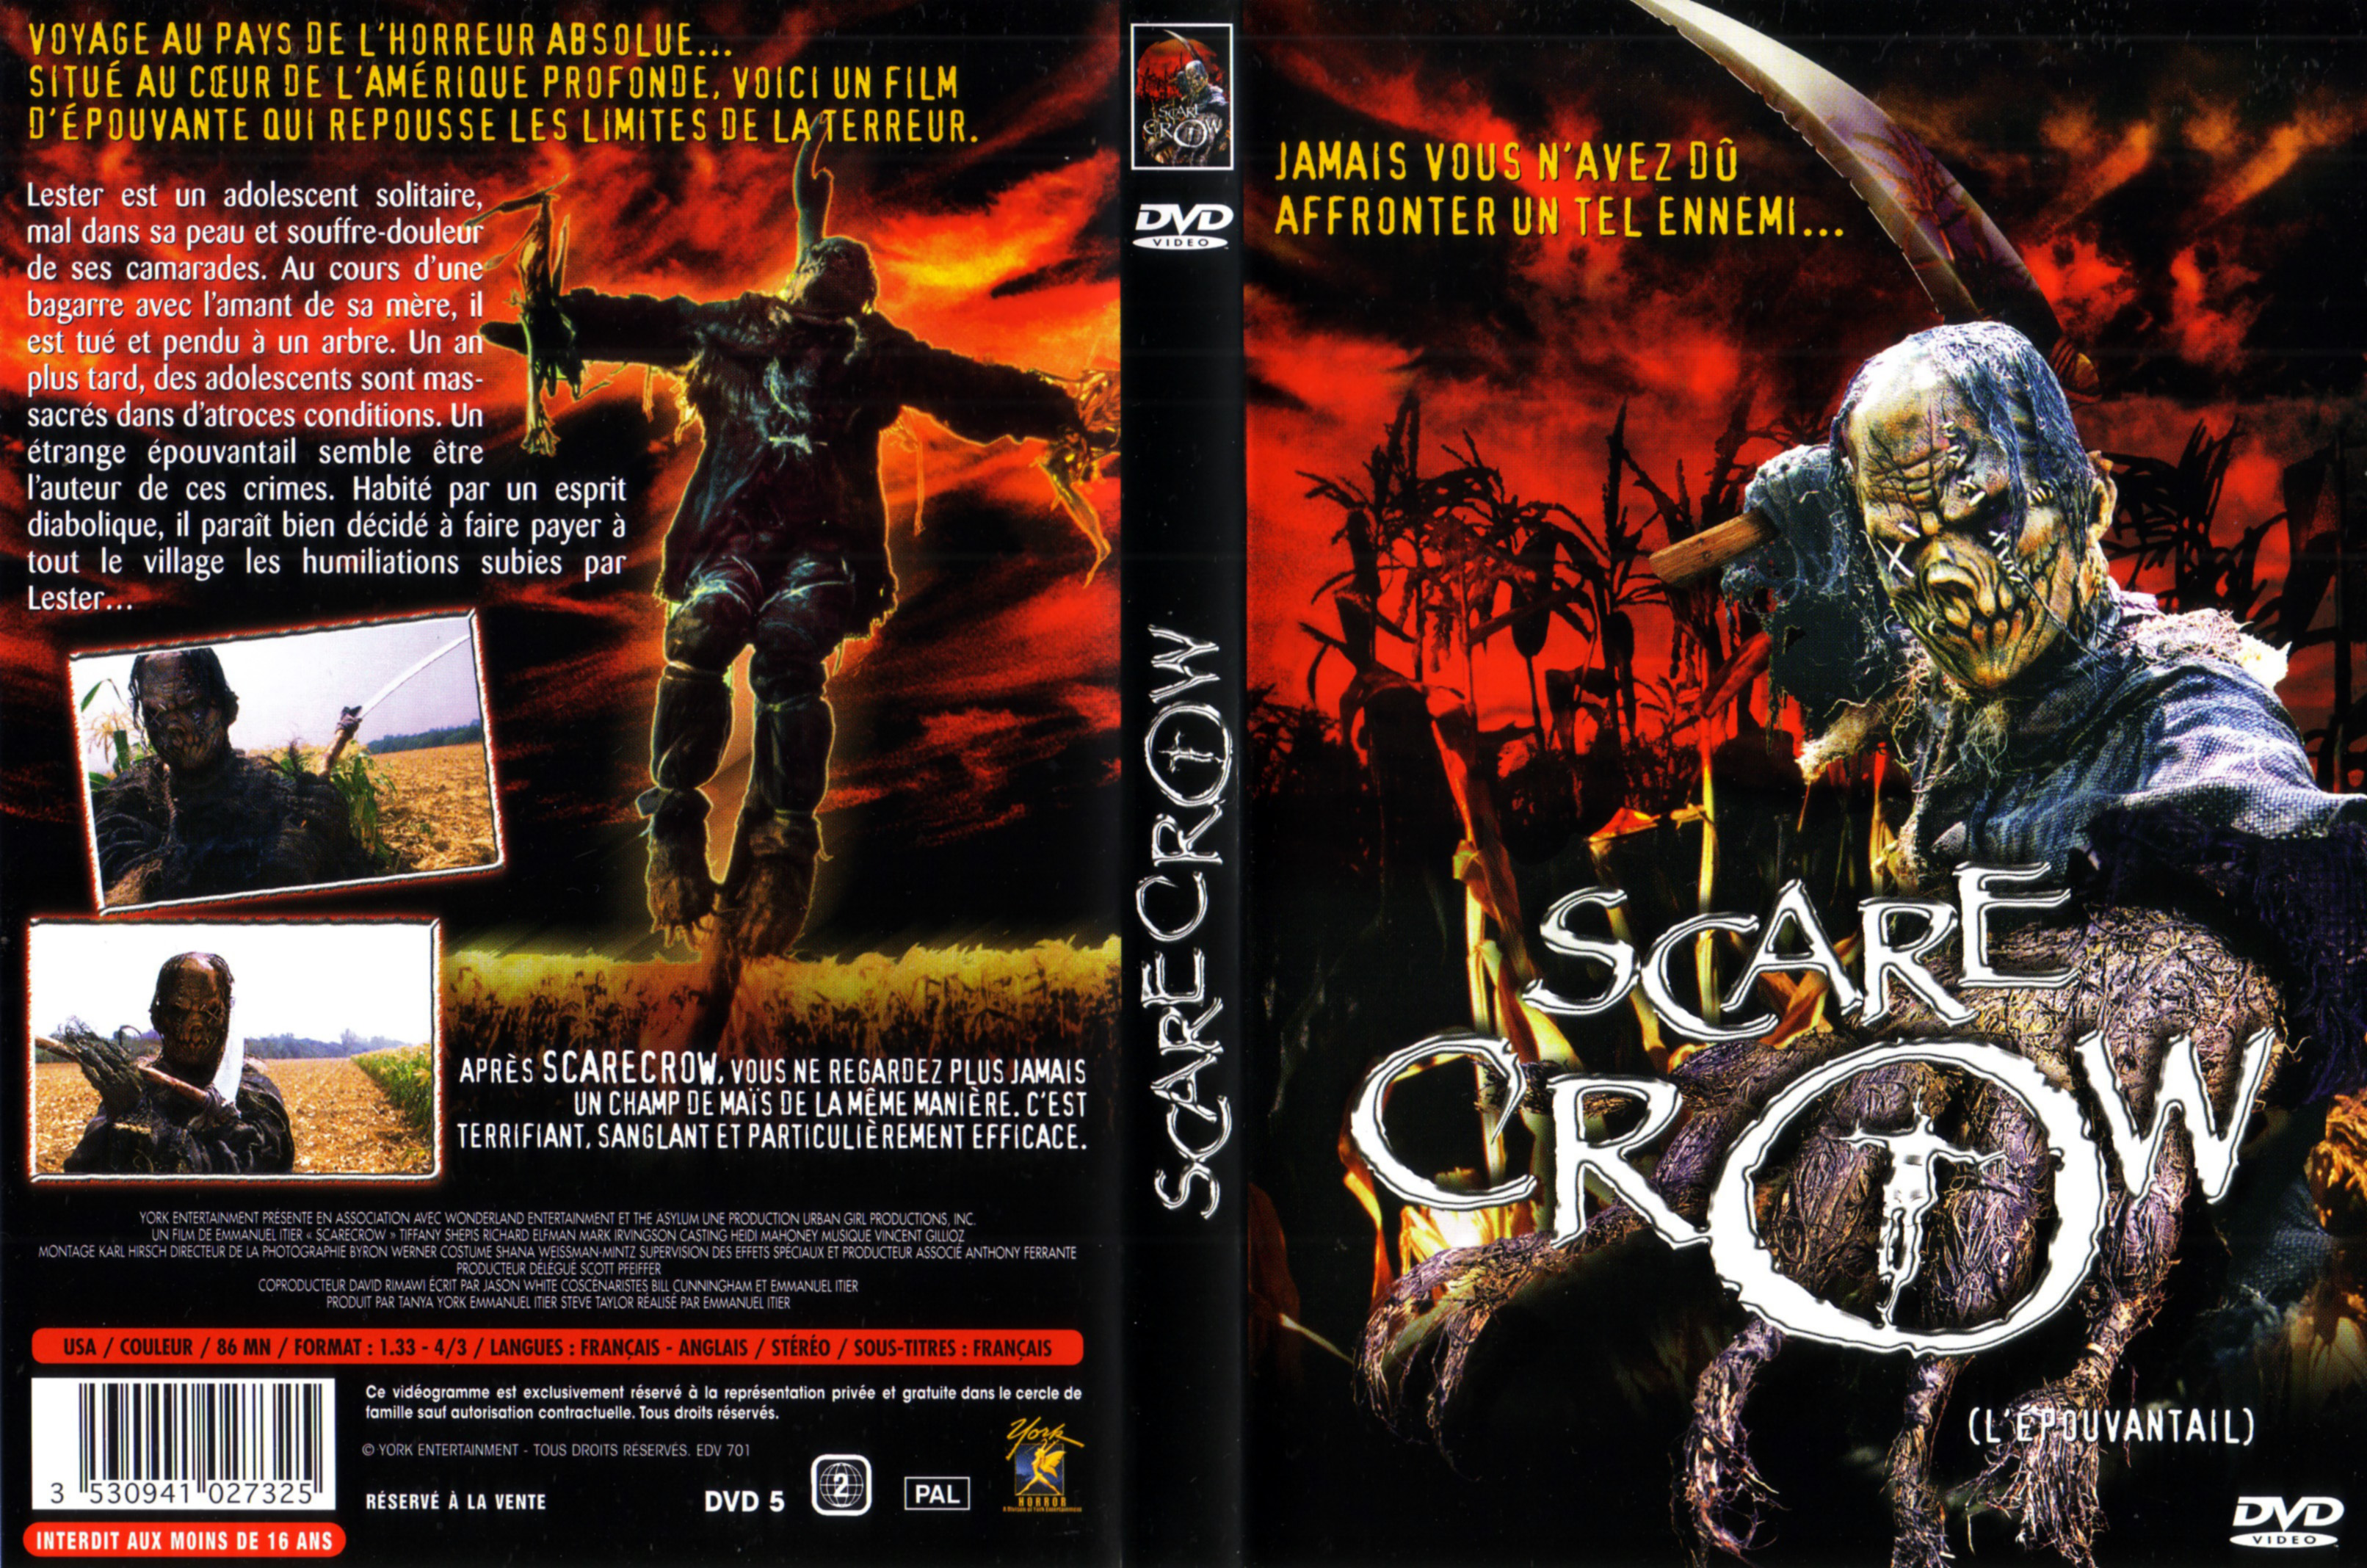 Jaquette DVD Scare crow